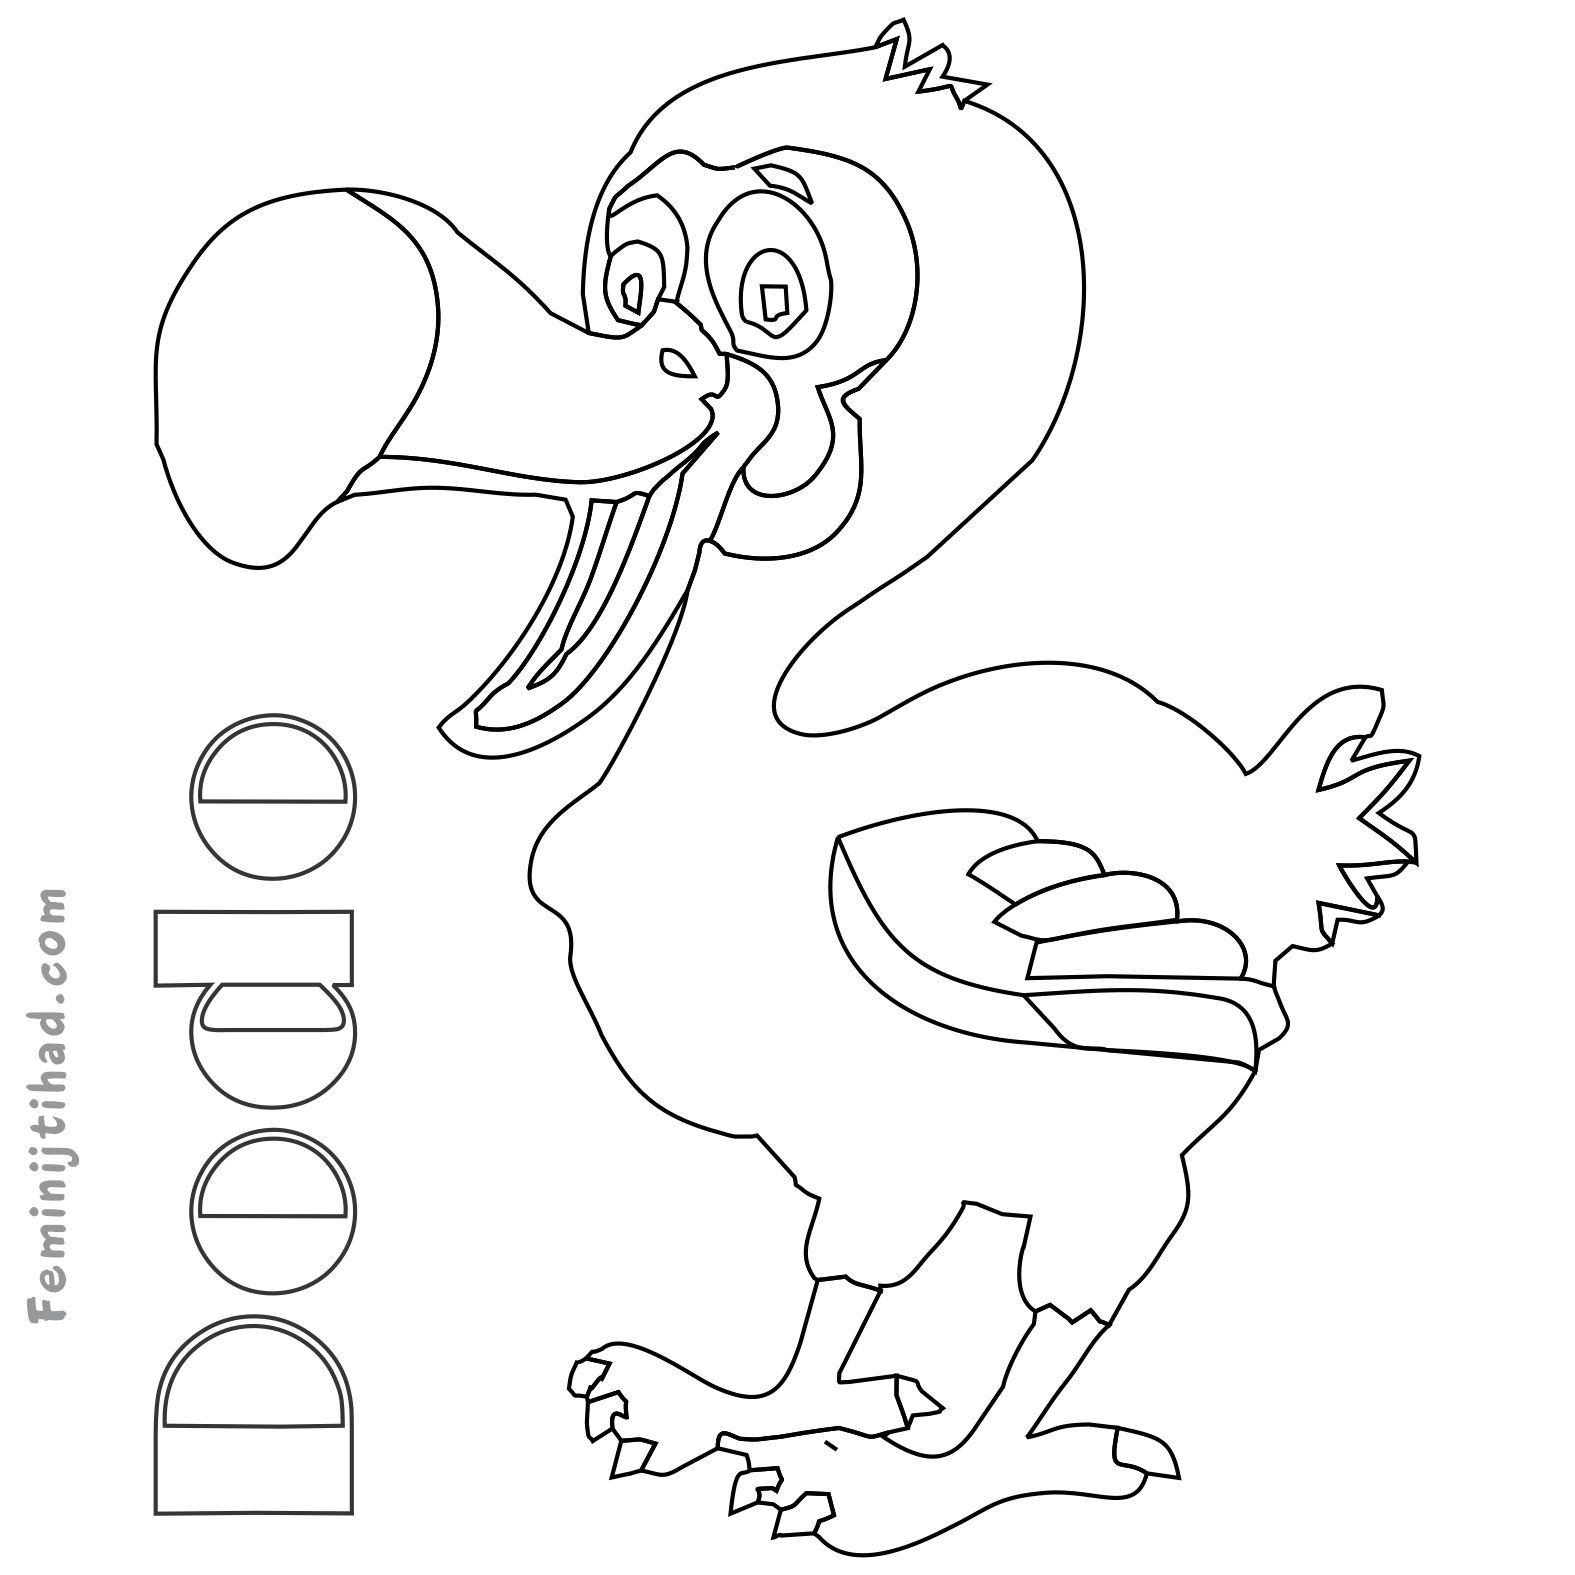 Dodo Bird Coloring Page at GetColorings.com | Free printable colorings